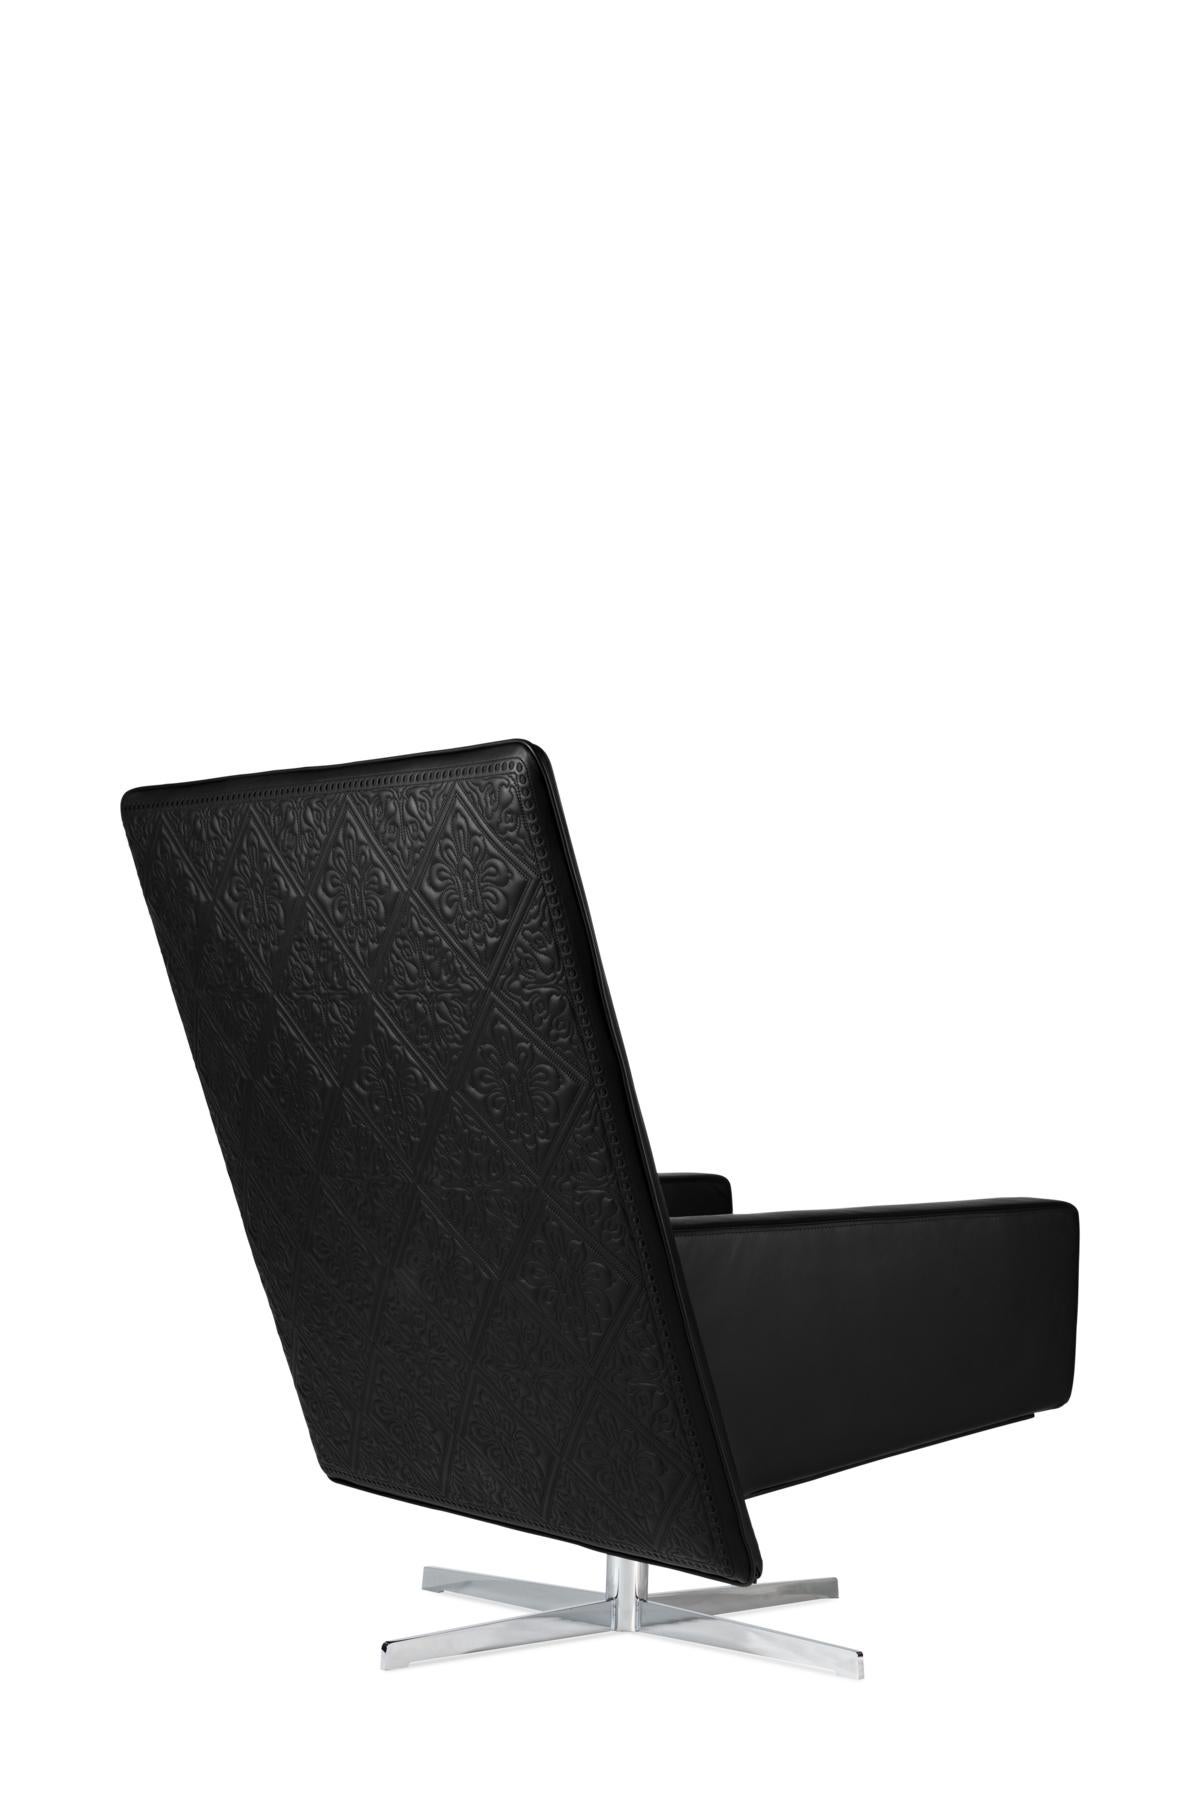 Modern Moooi Jackson Chair in Black Leather Embroidery Upholstery with Steel Frame For Sale